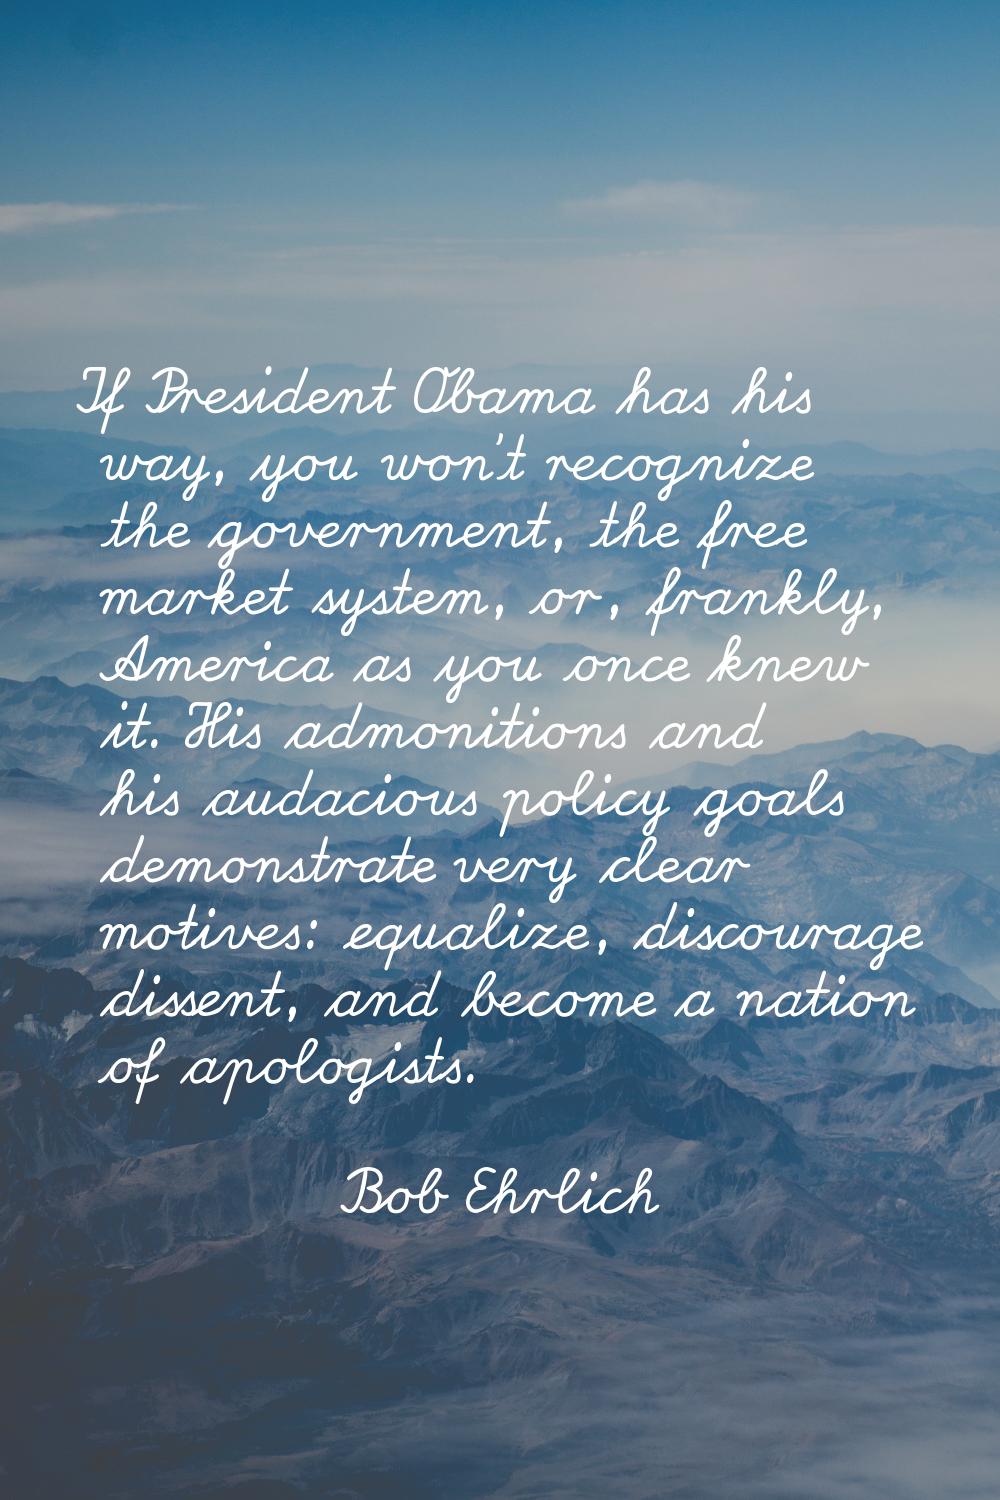 If President Obama has his way, you won't recognize the government, the free market system, or, fra